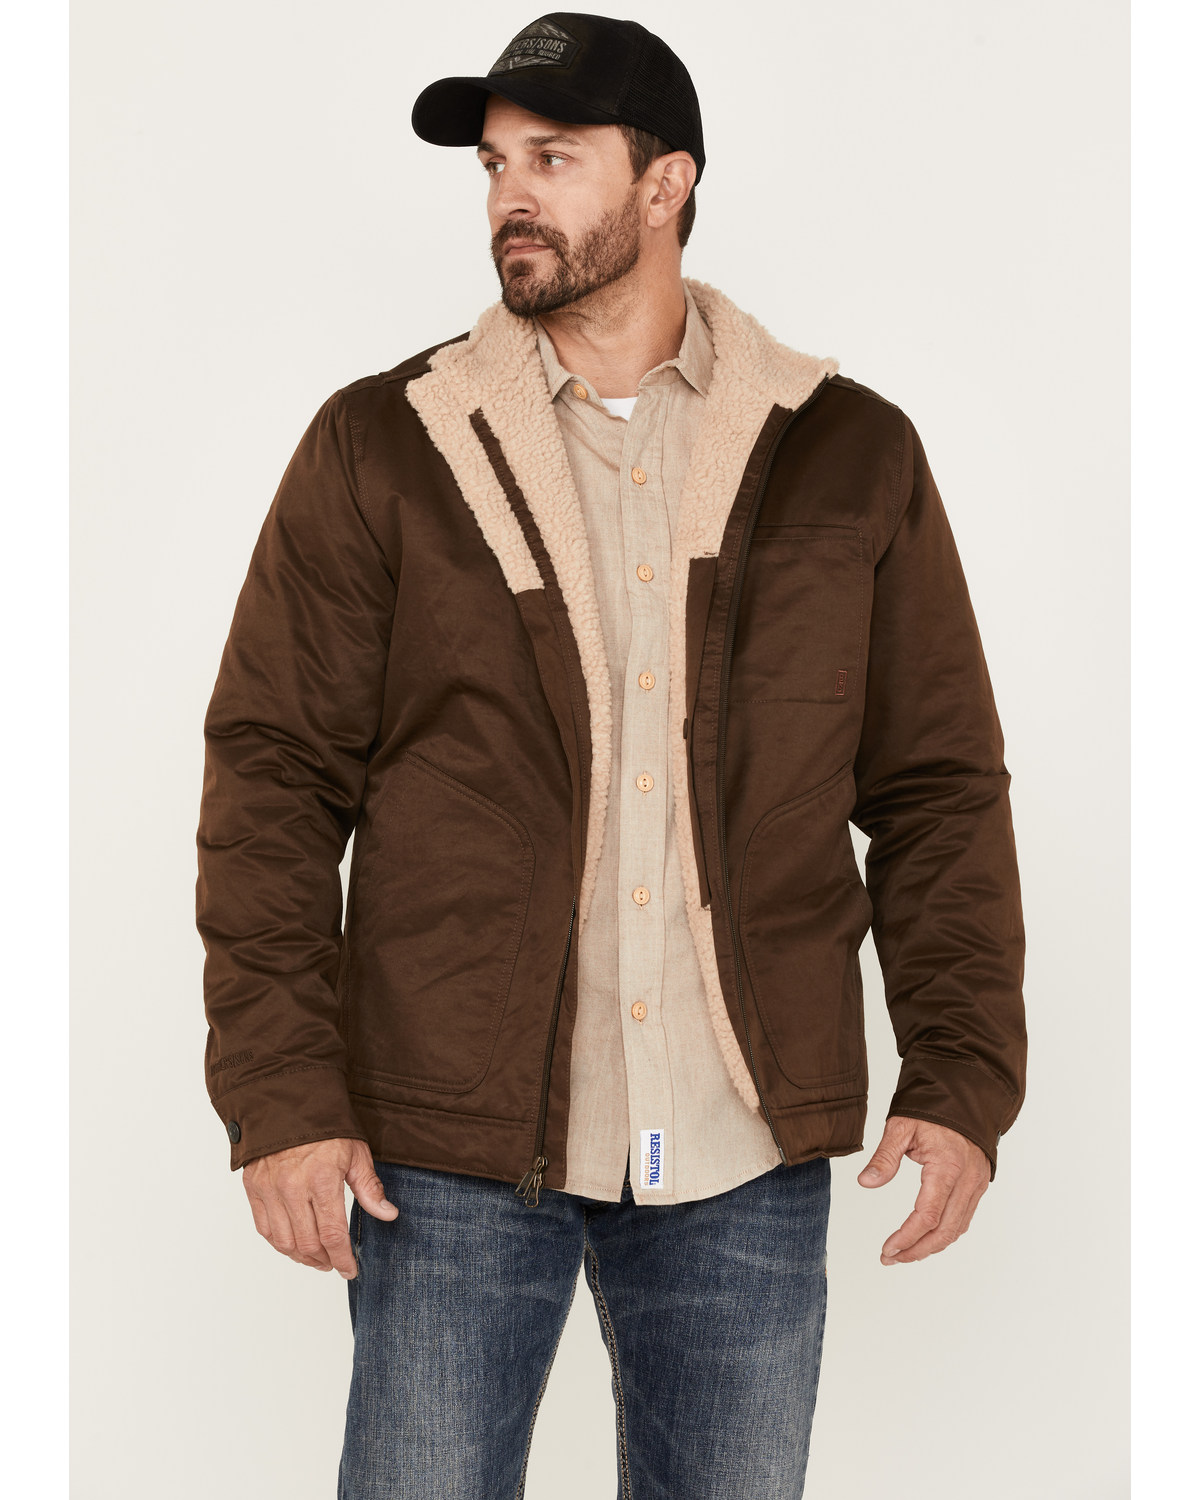 Brothers and Sons Men's Concealed Carry Sherpa Lined Jacket